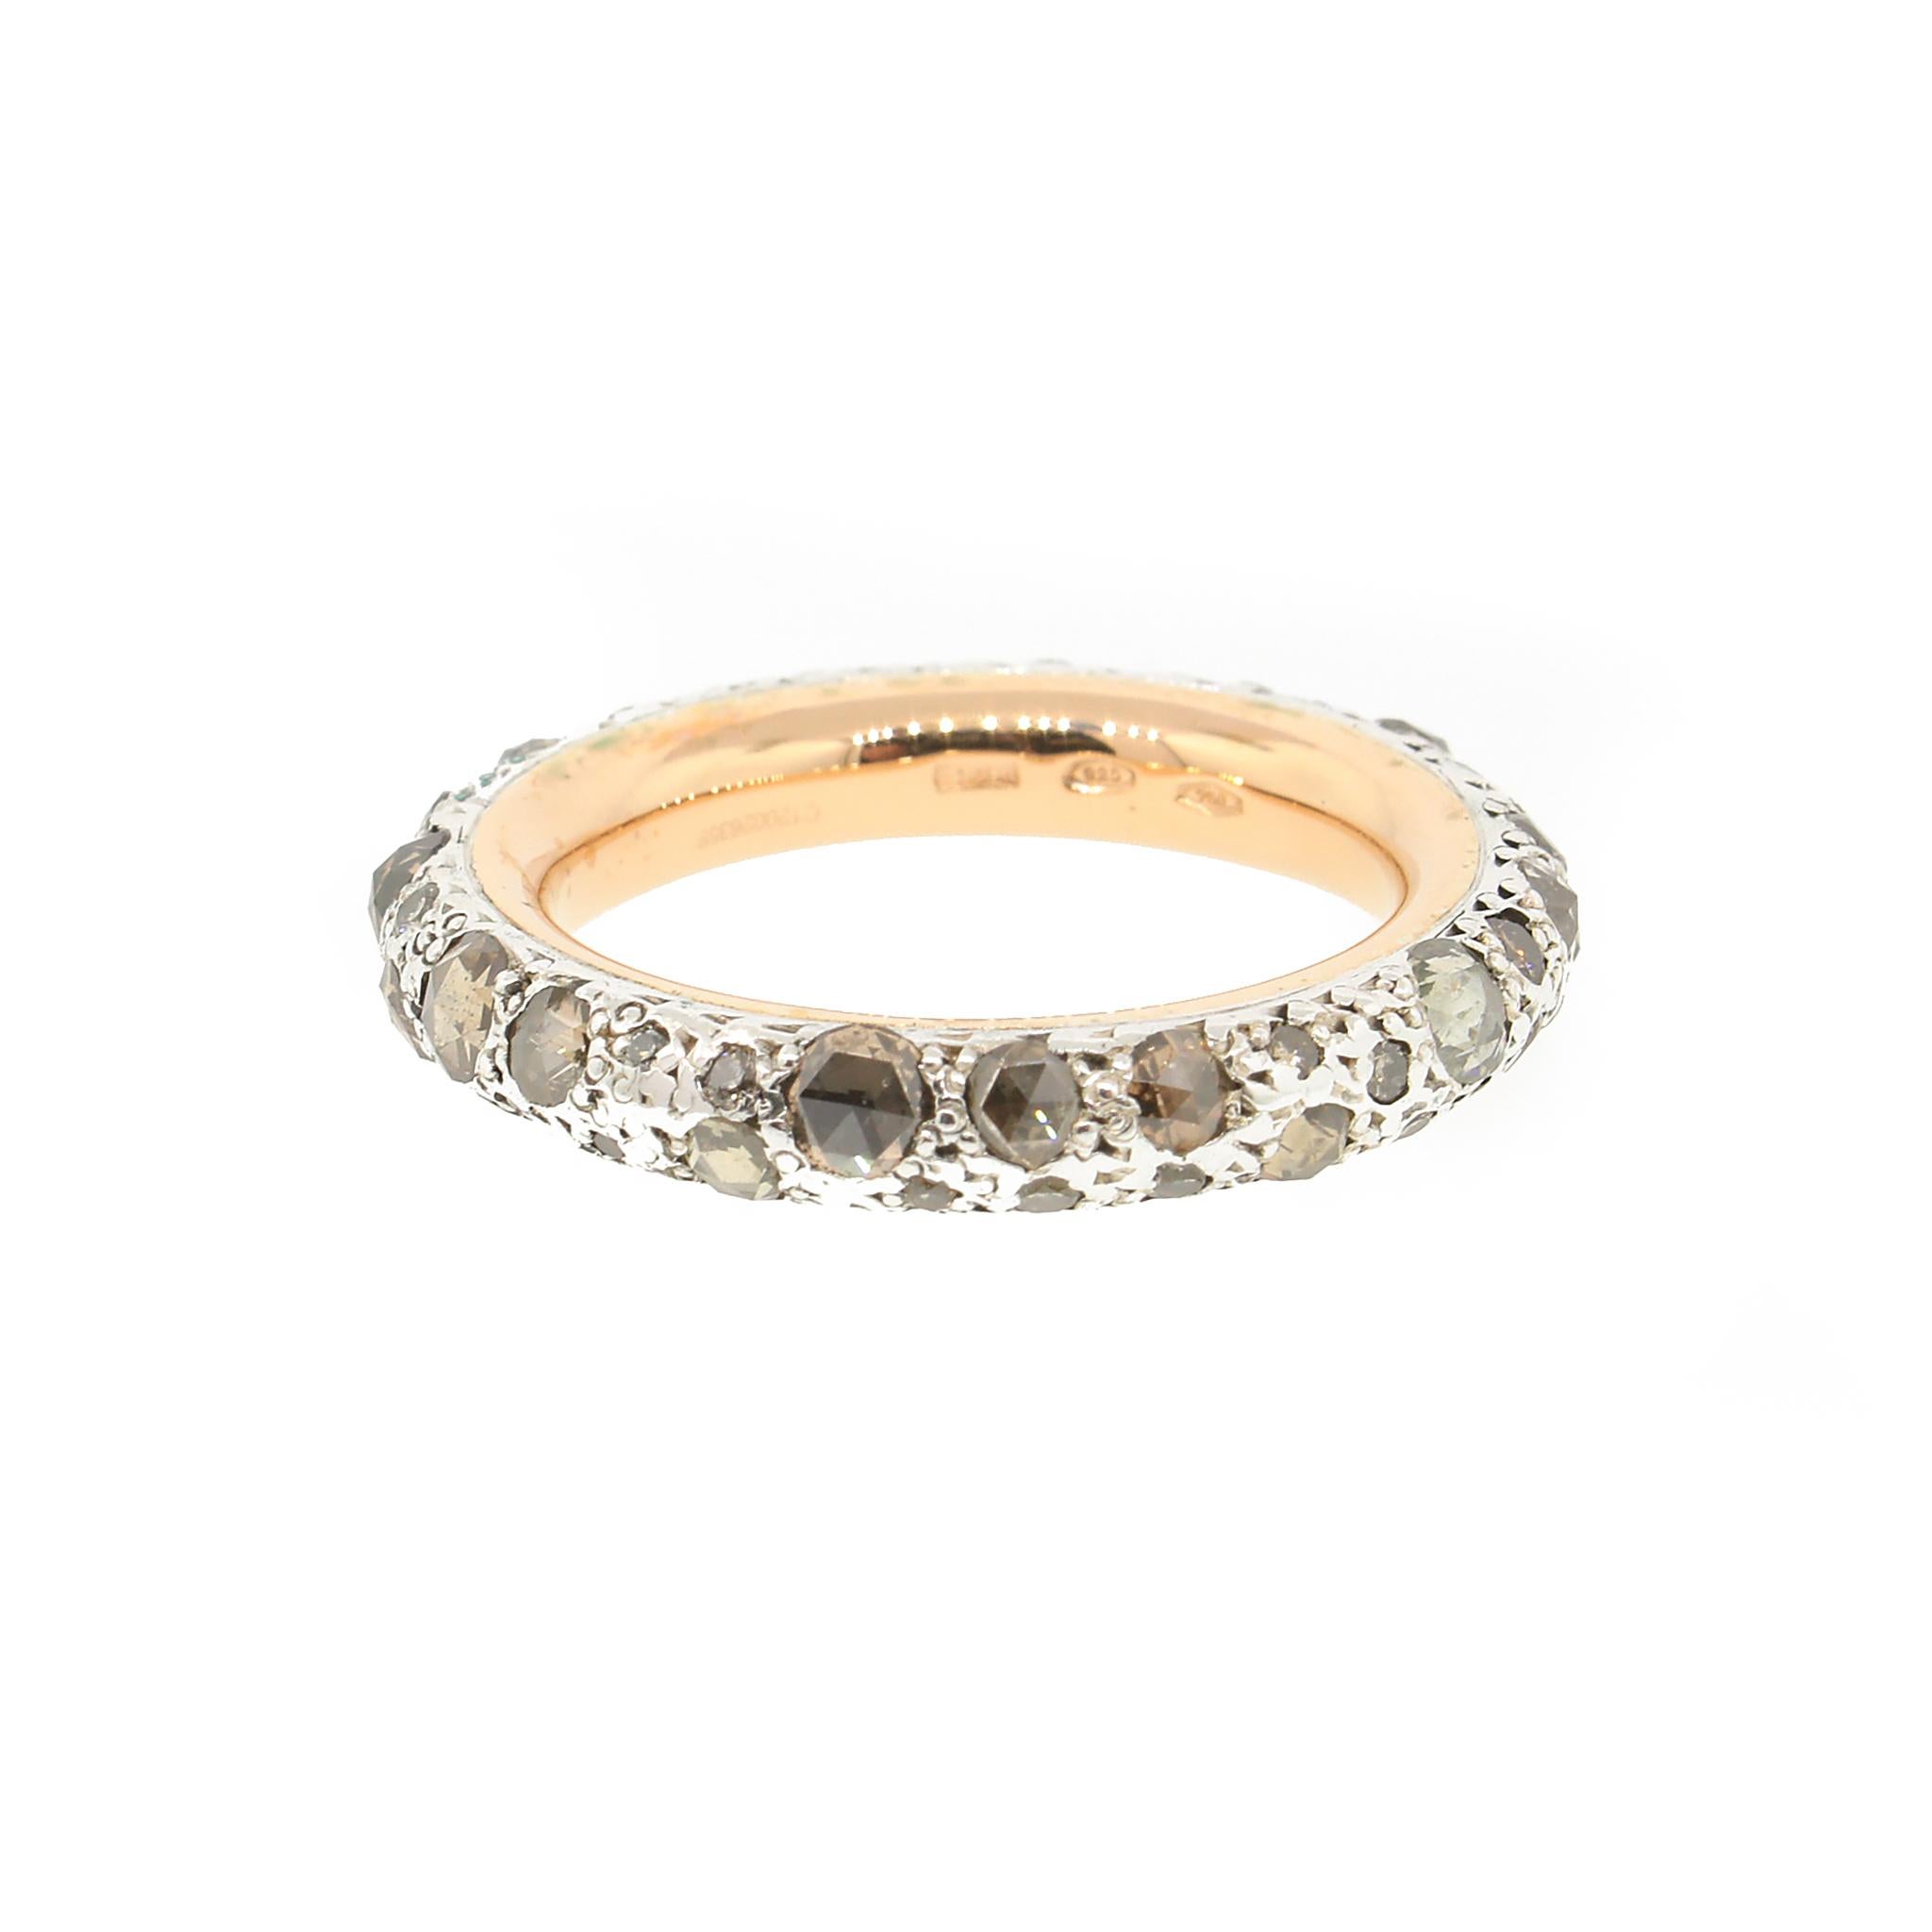 18 kt Yellow gold, Sterling Silver
Diamond: 1.91 ct twd
Diamond Hue: Brown Rose Cut Diamonds
Clarity: Slightly Included
Total Weight: 6.9 grams
Band Width: 4 mm
Ring Size: 7.75